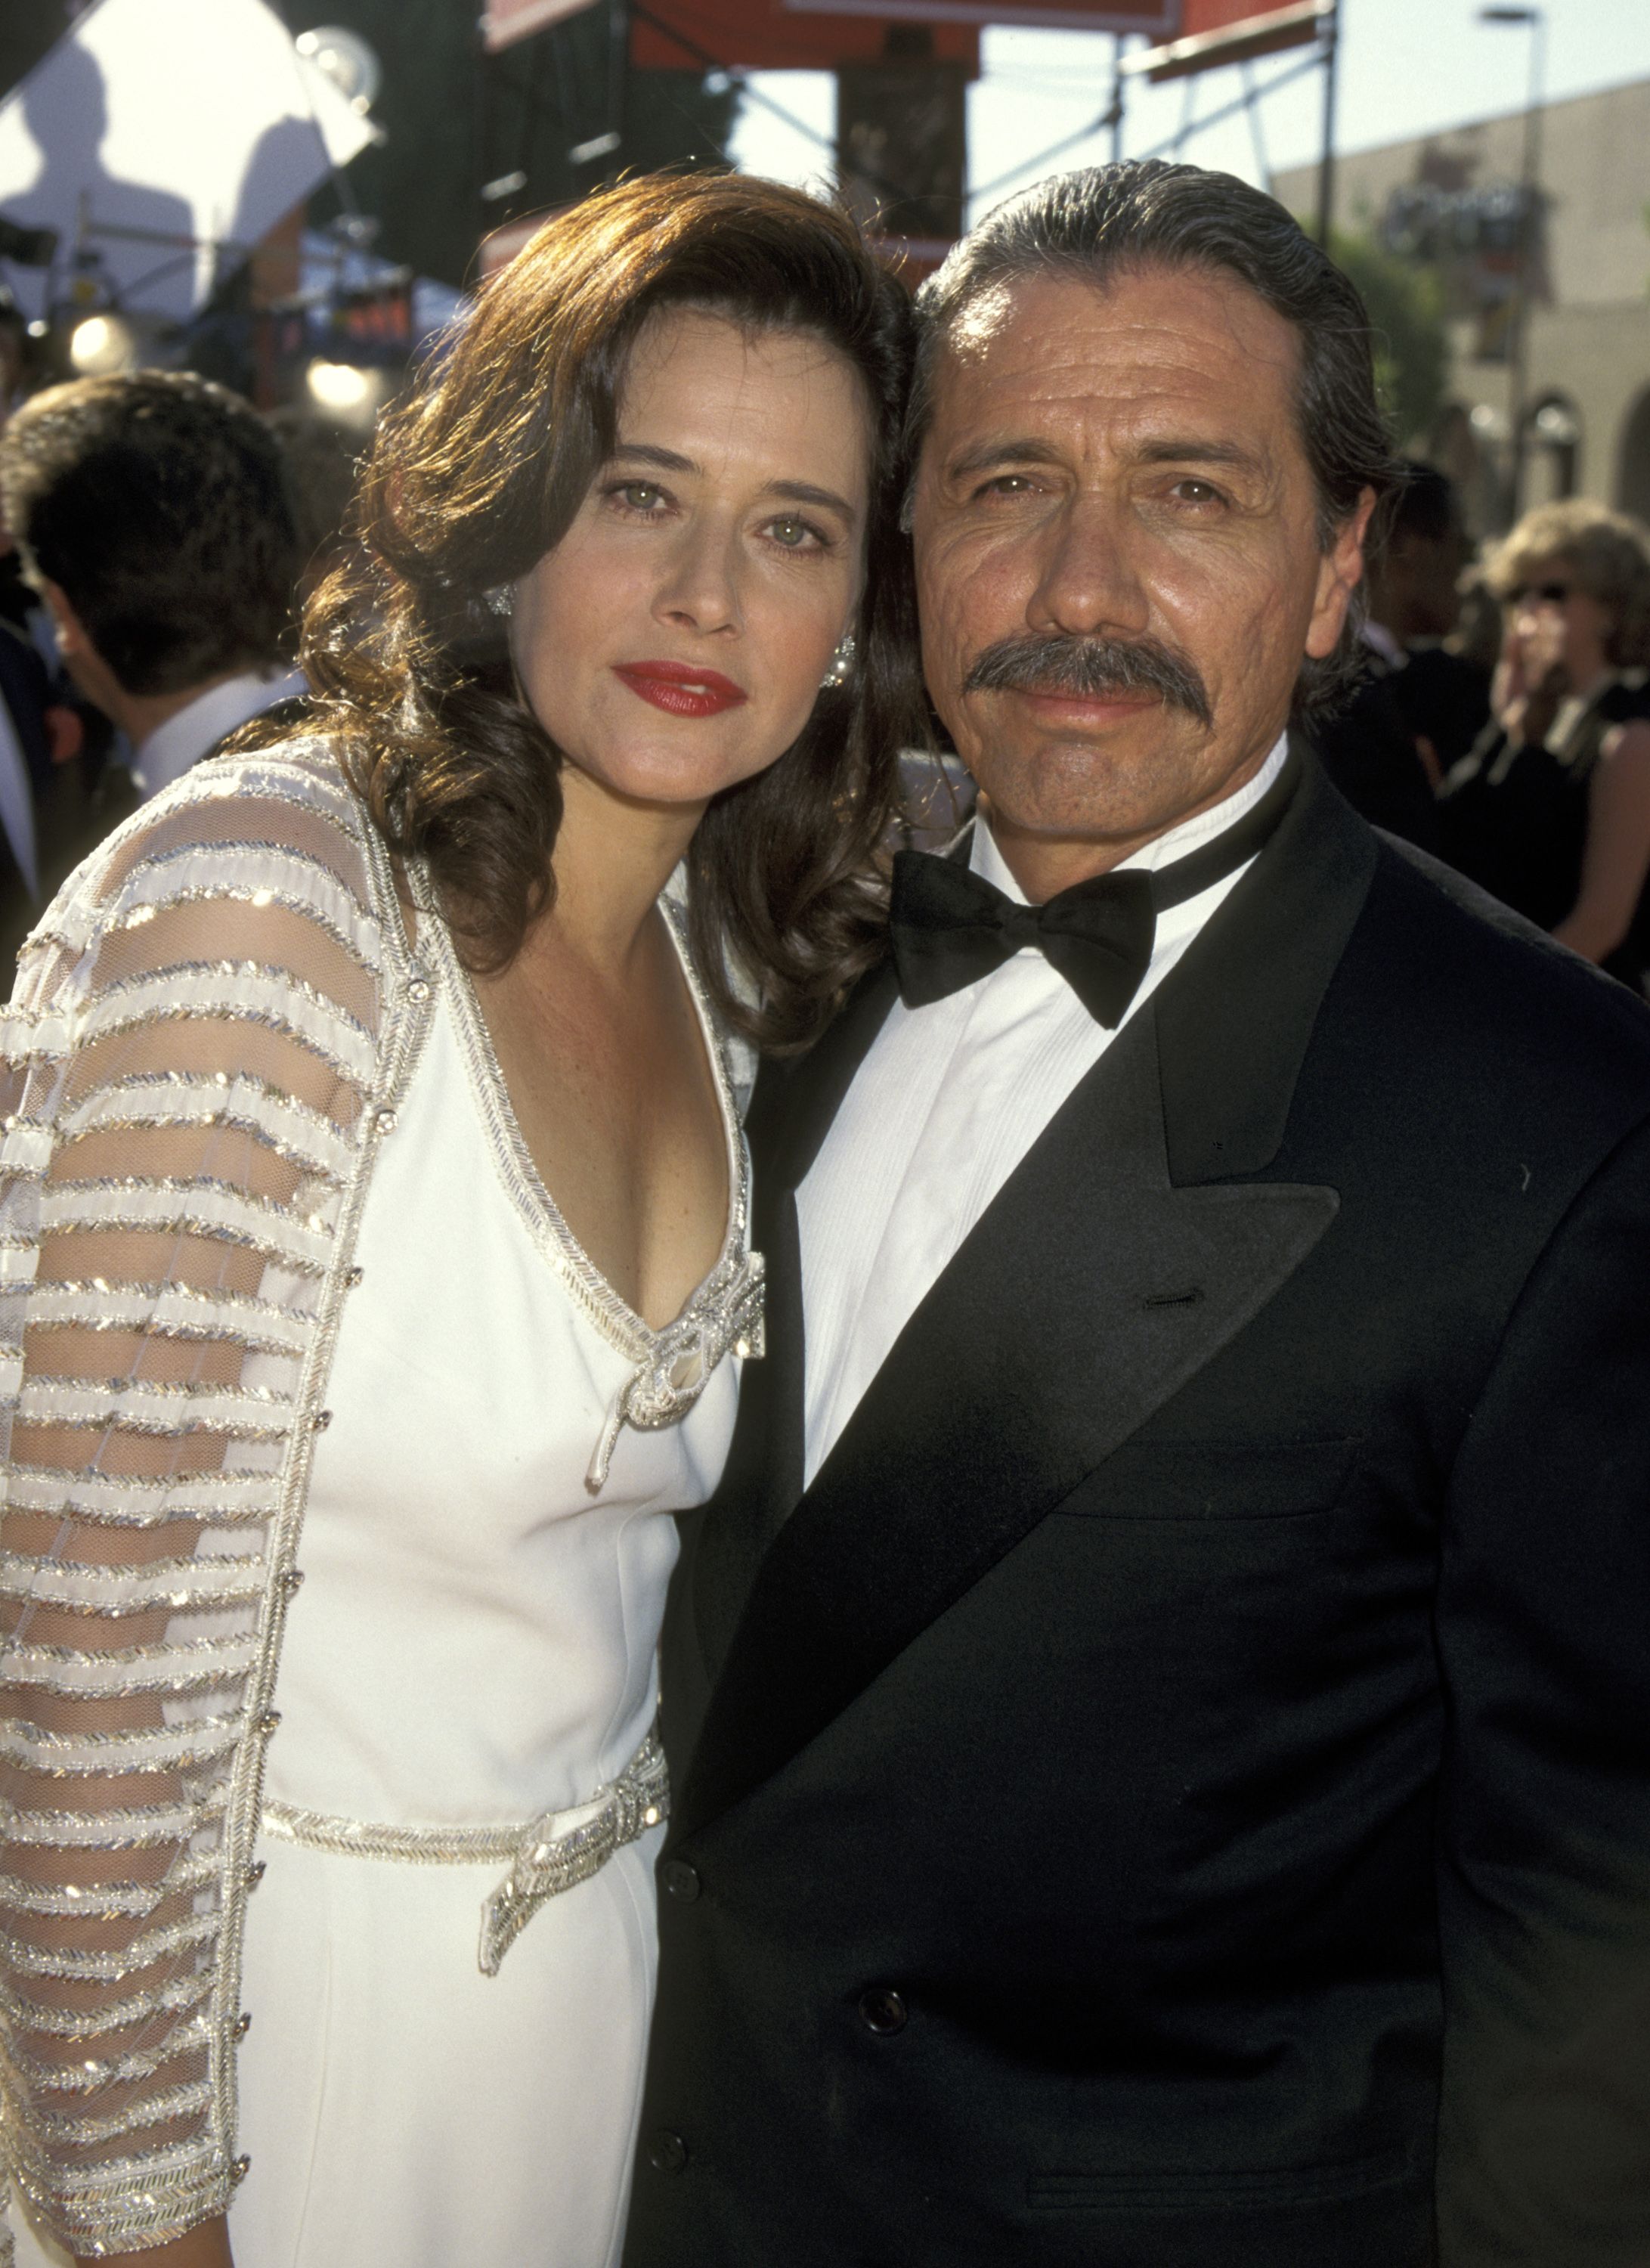 Lorraine Bracco and Edward James Olmos at the 47th Annual Primetime Emmy Awards in 1995 in Pasadena | Source: Getty Images 